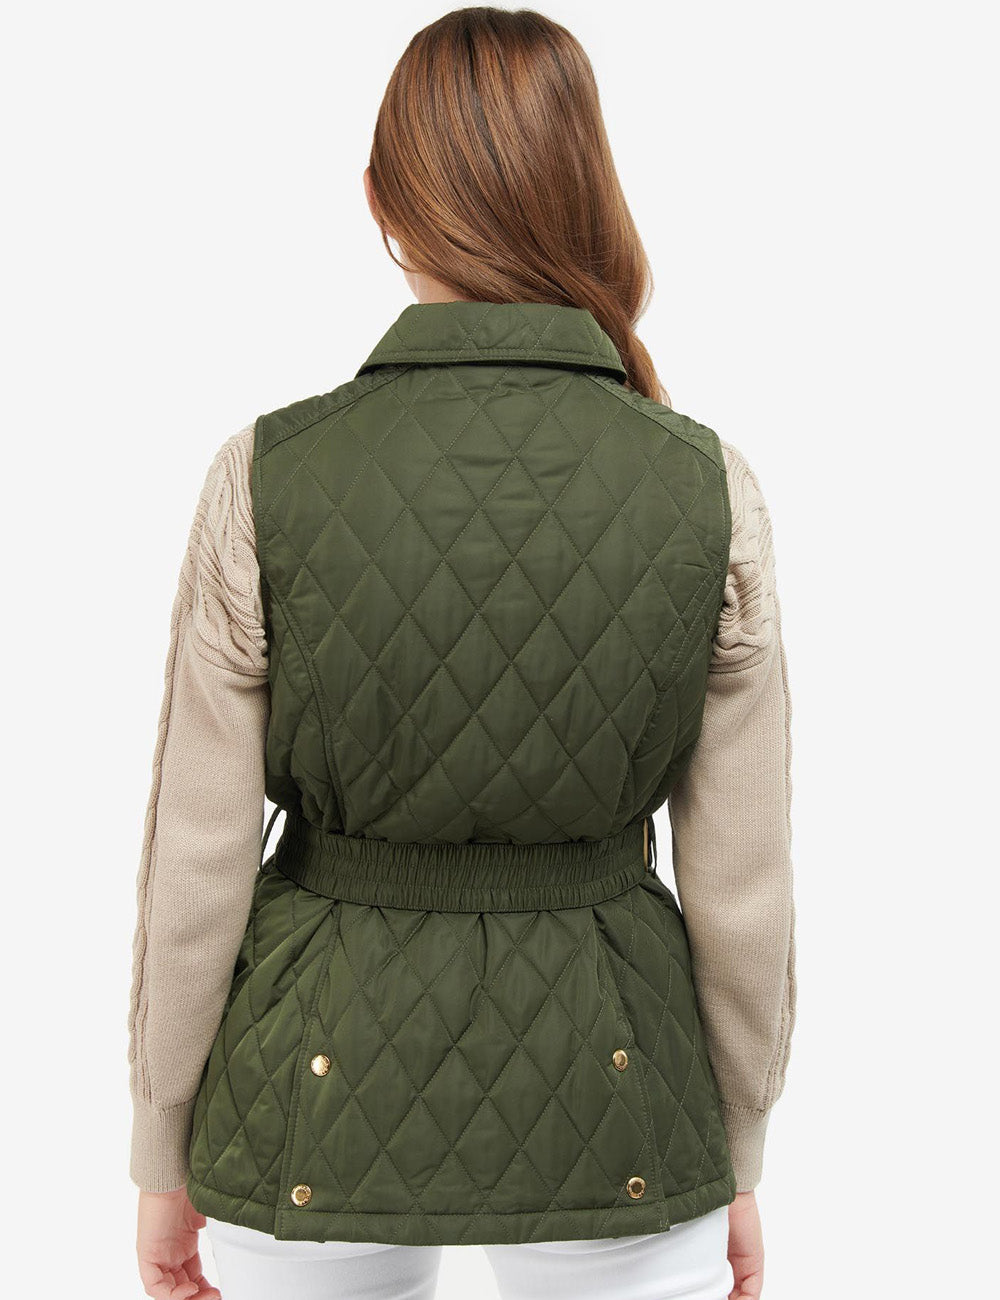 View from the back of woman wearing the Belted Defence Gilet